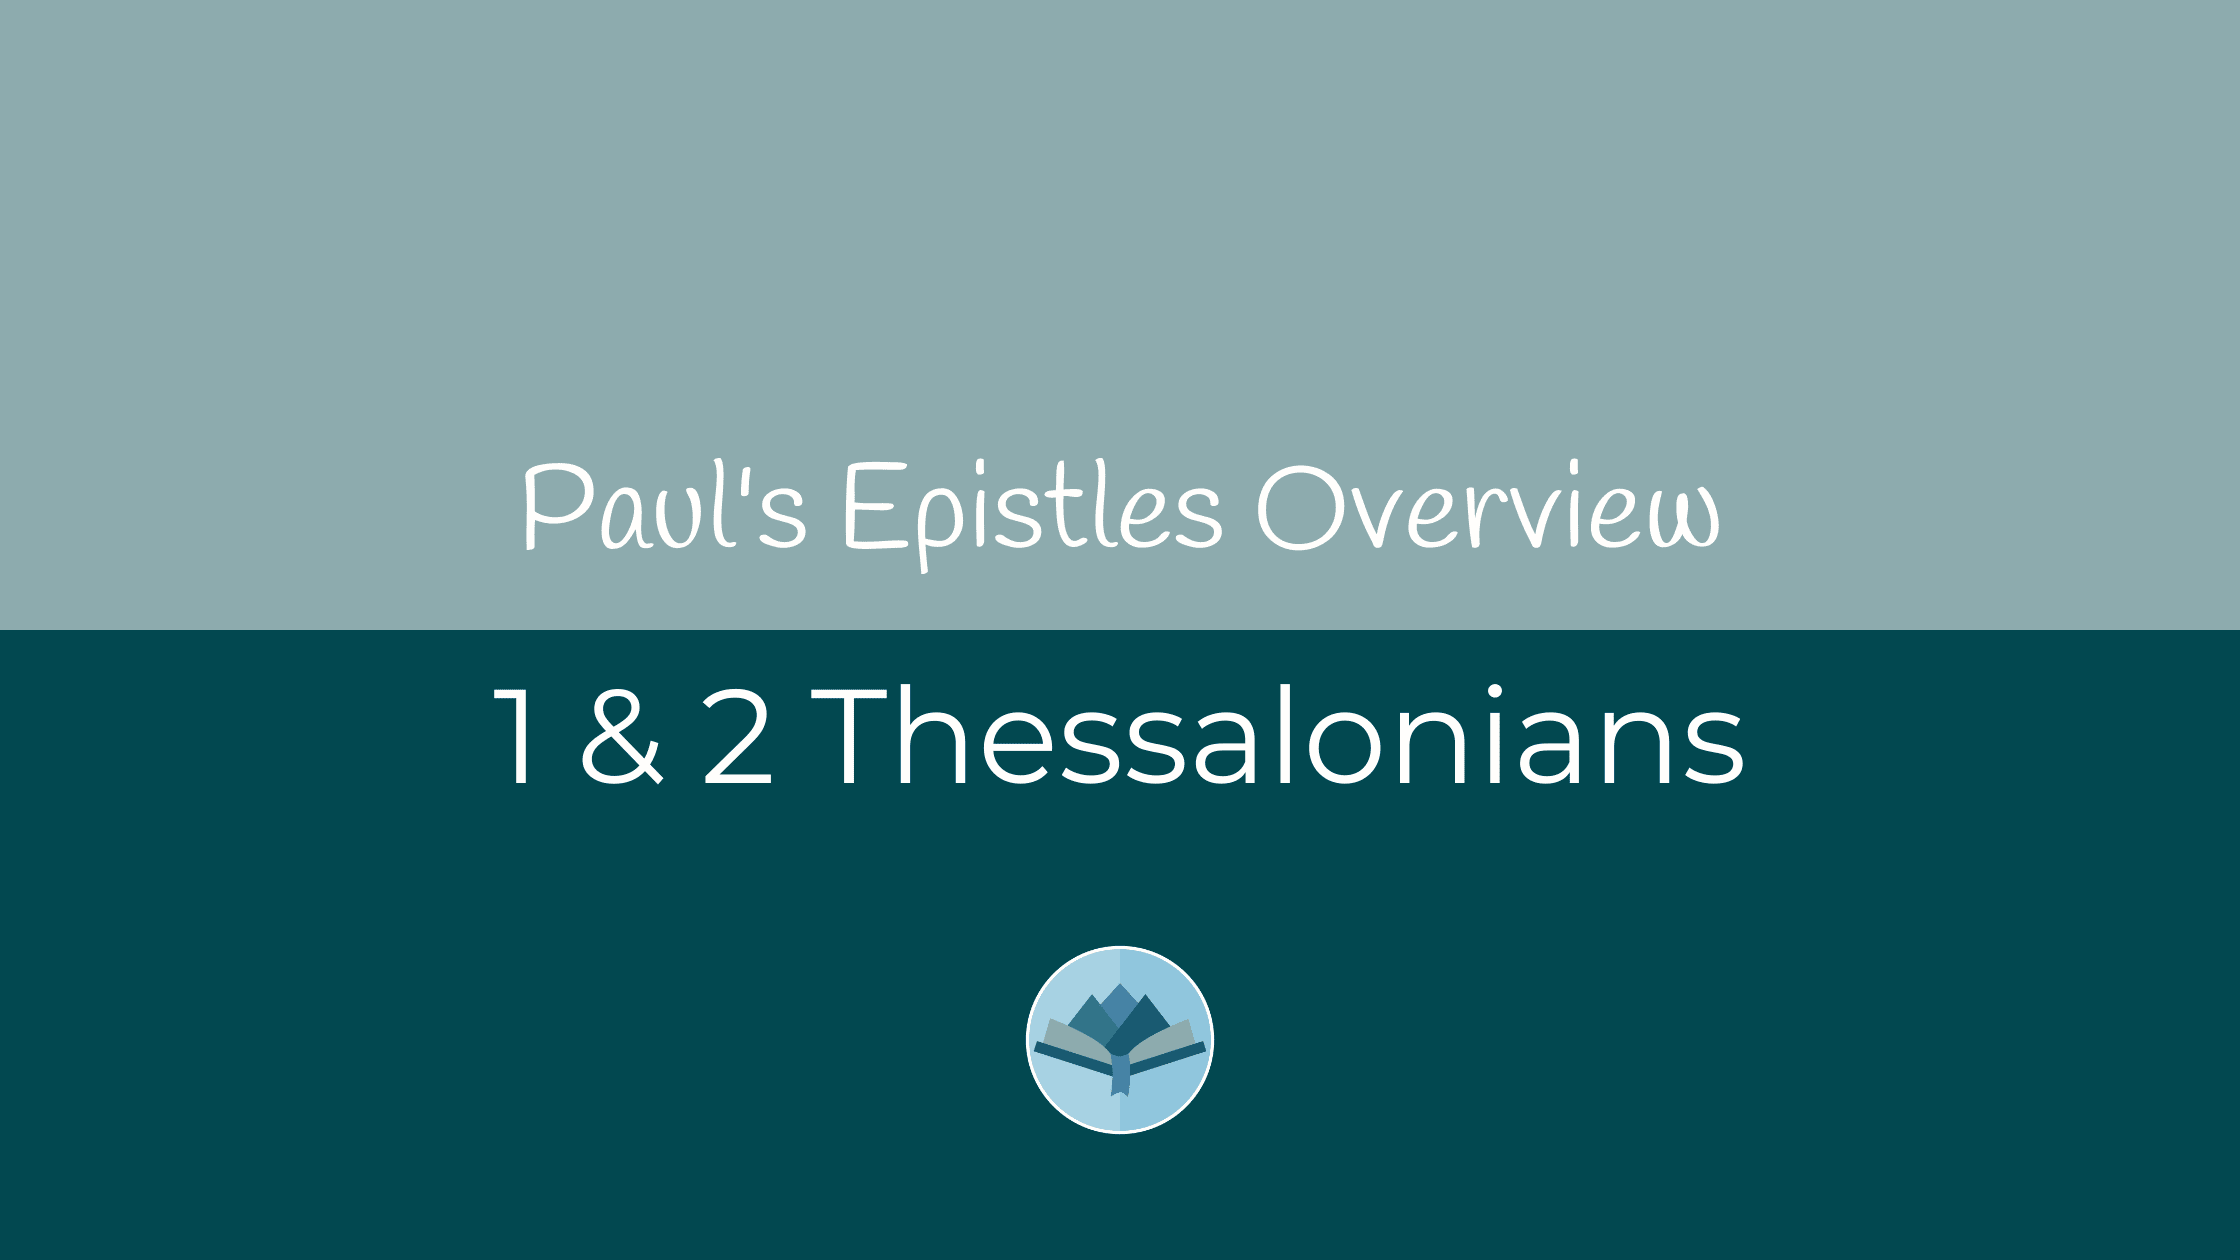 1 & 2 Thessalonians Overview